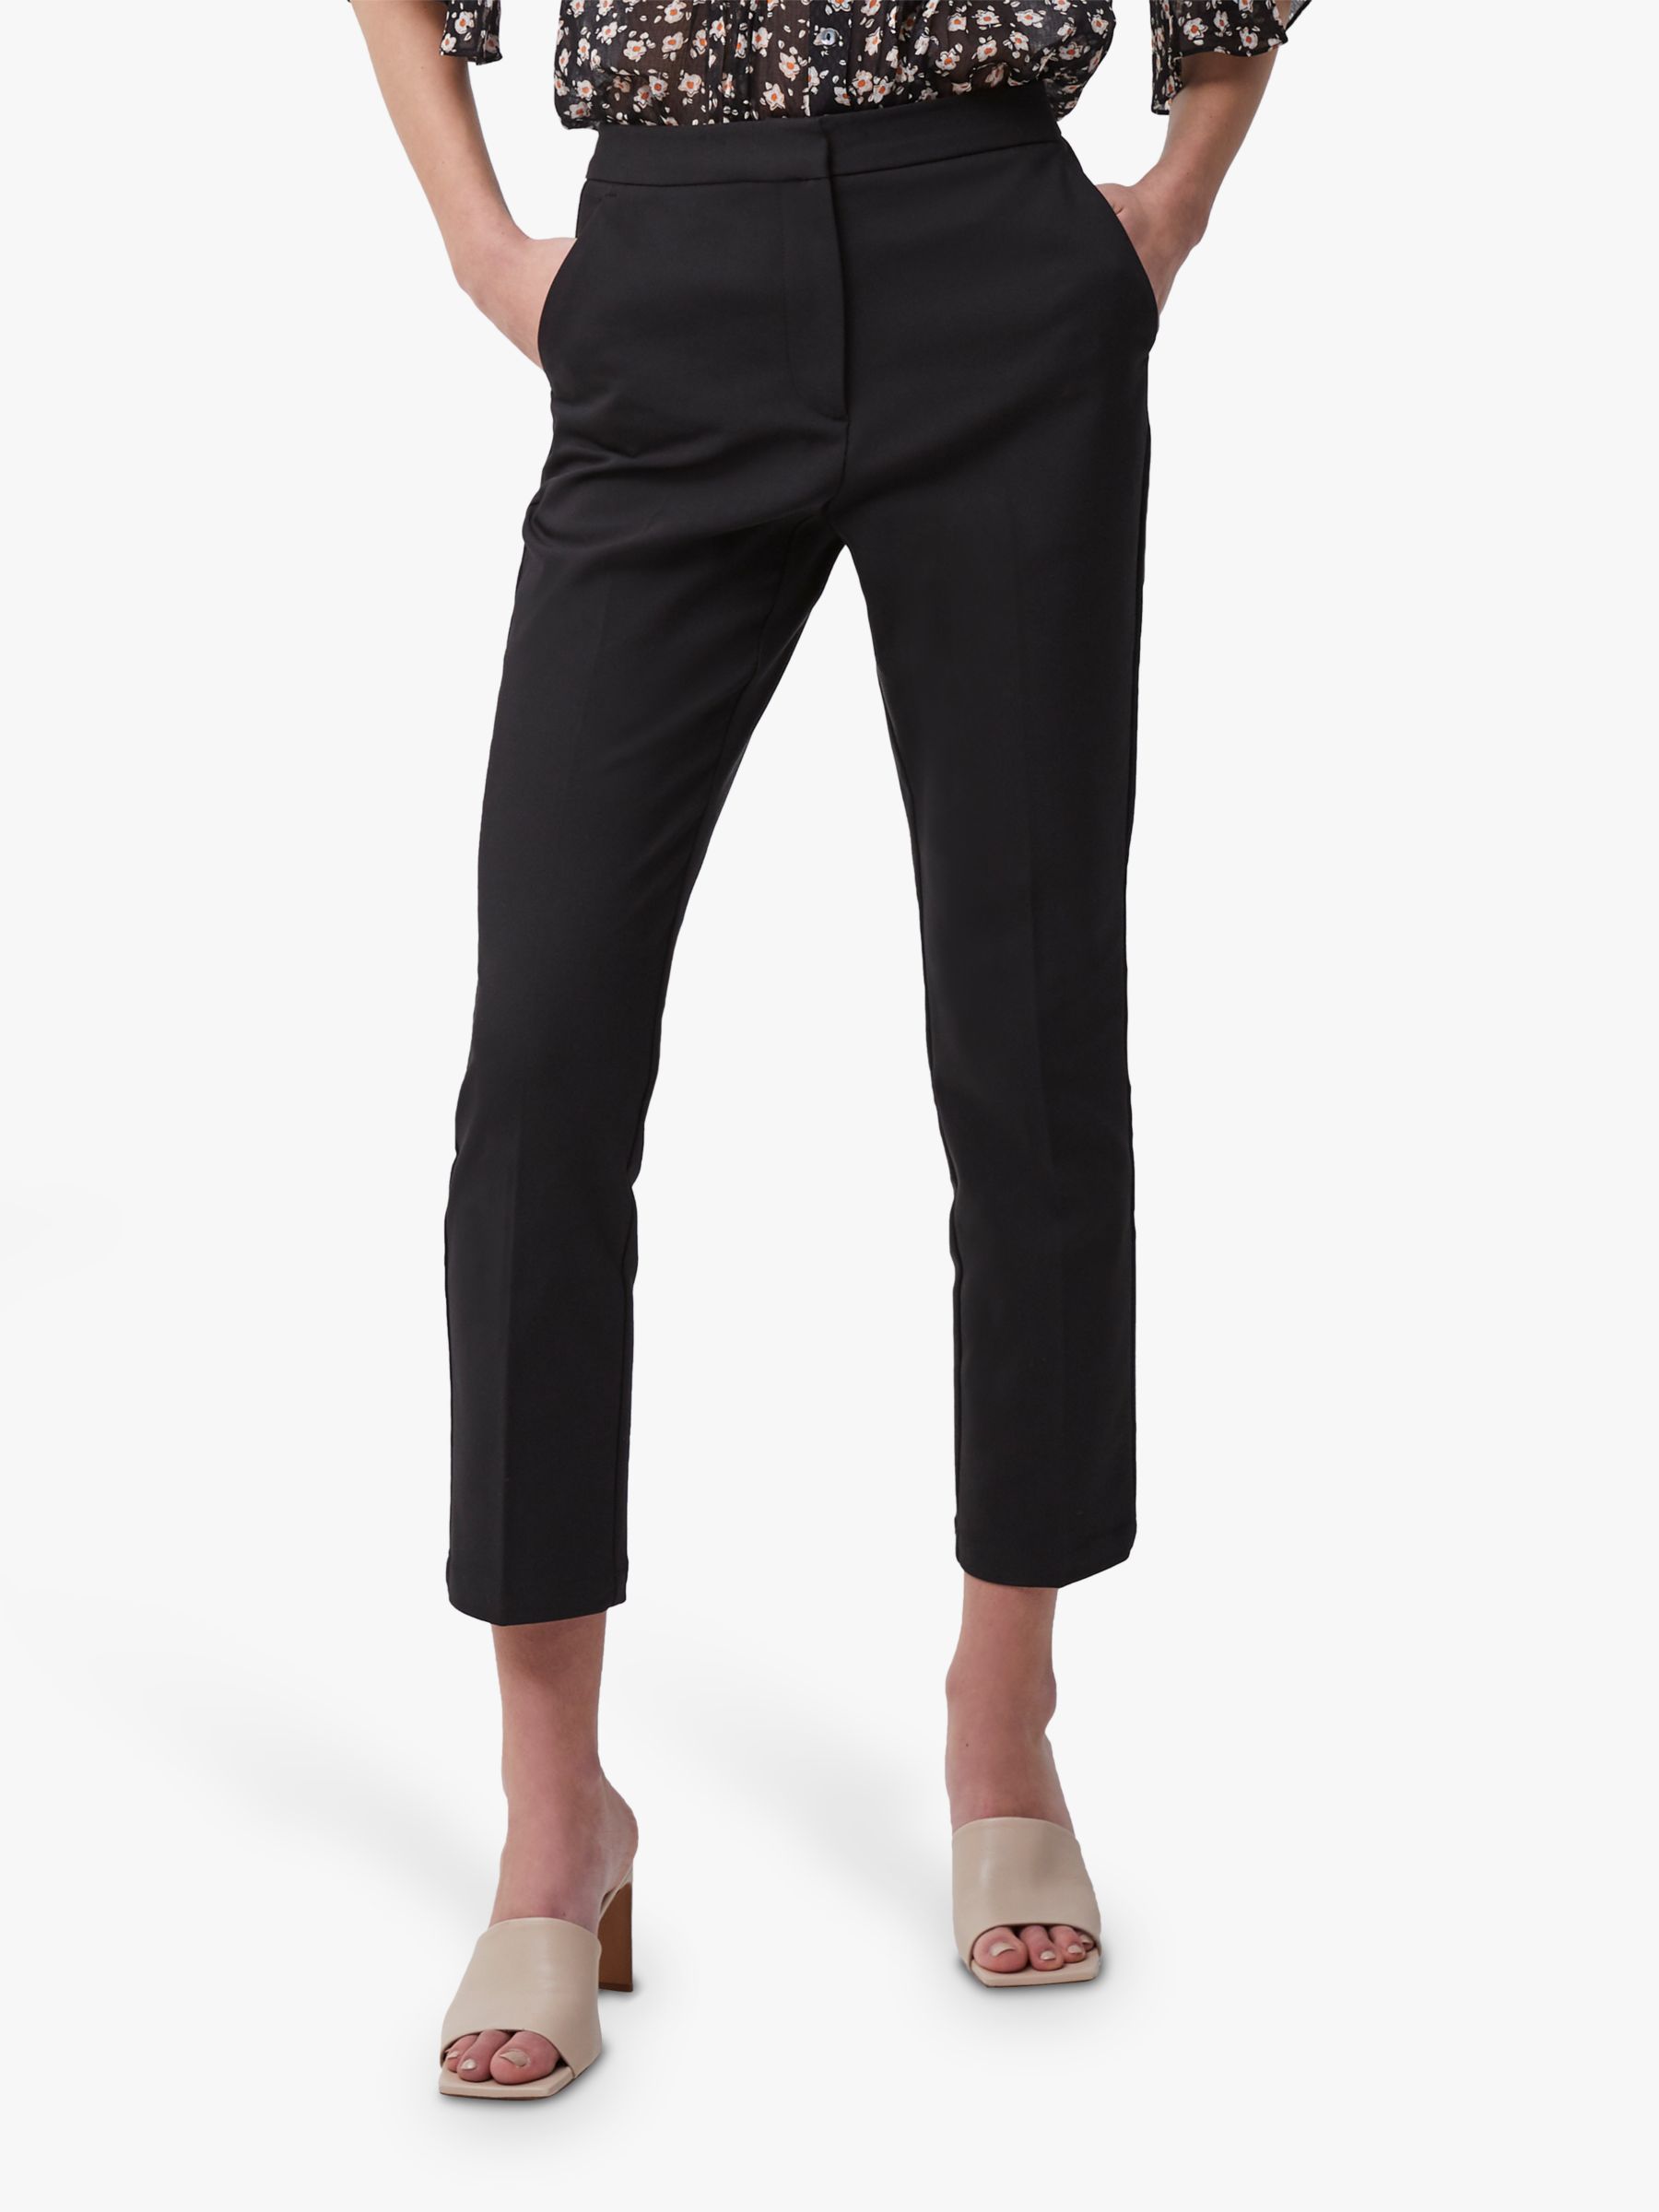 French Connection Fino Cropped Trousers, Black at John Lewis & Partners